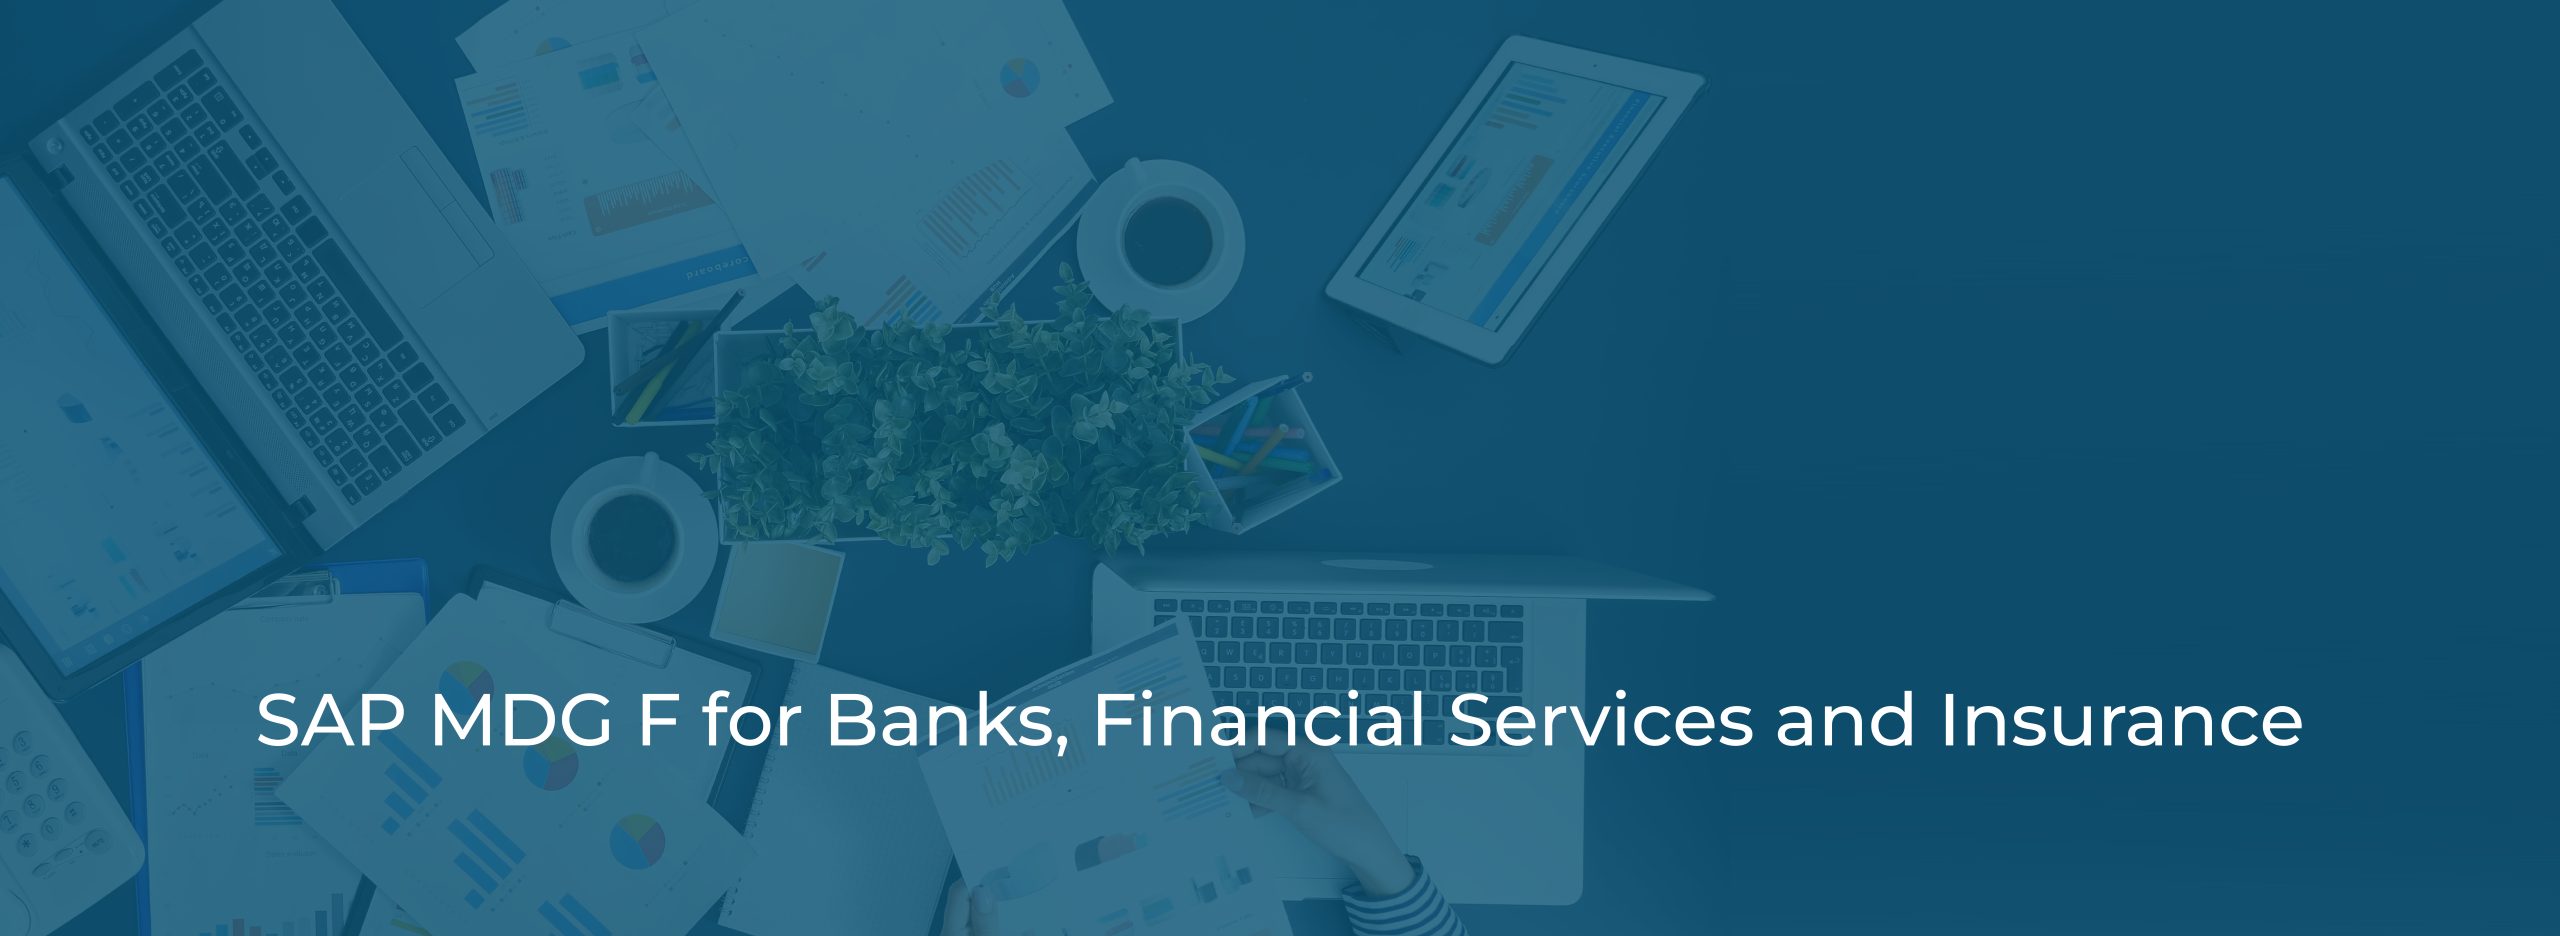 SAP MDG F for Banks, Financial Services and Insurance